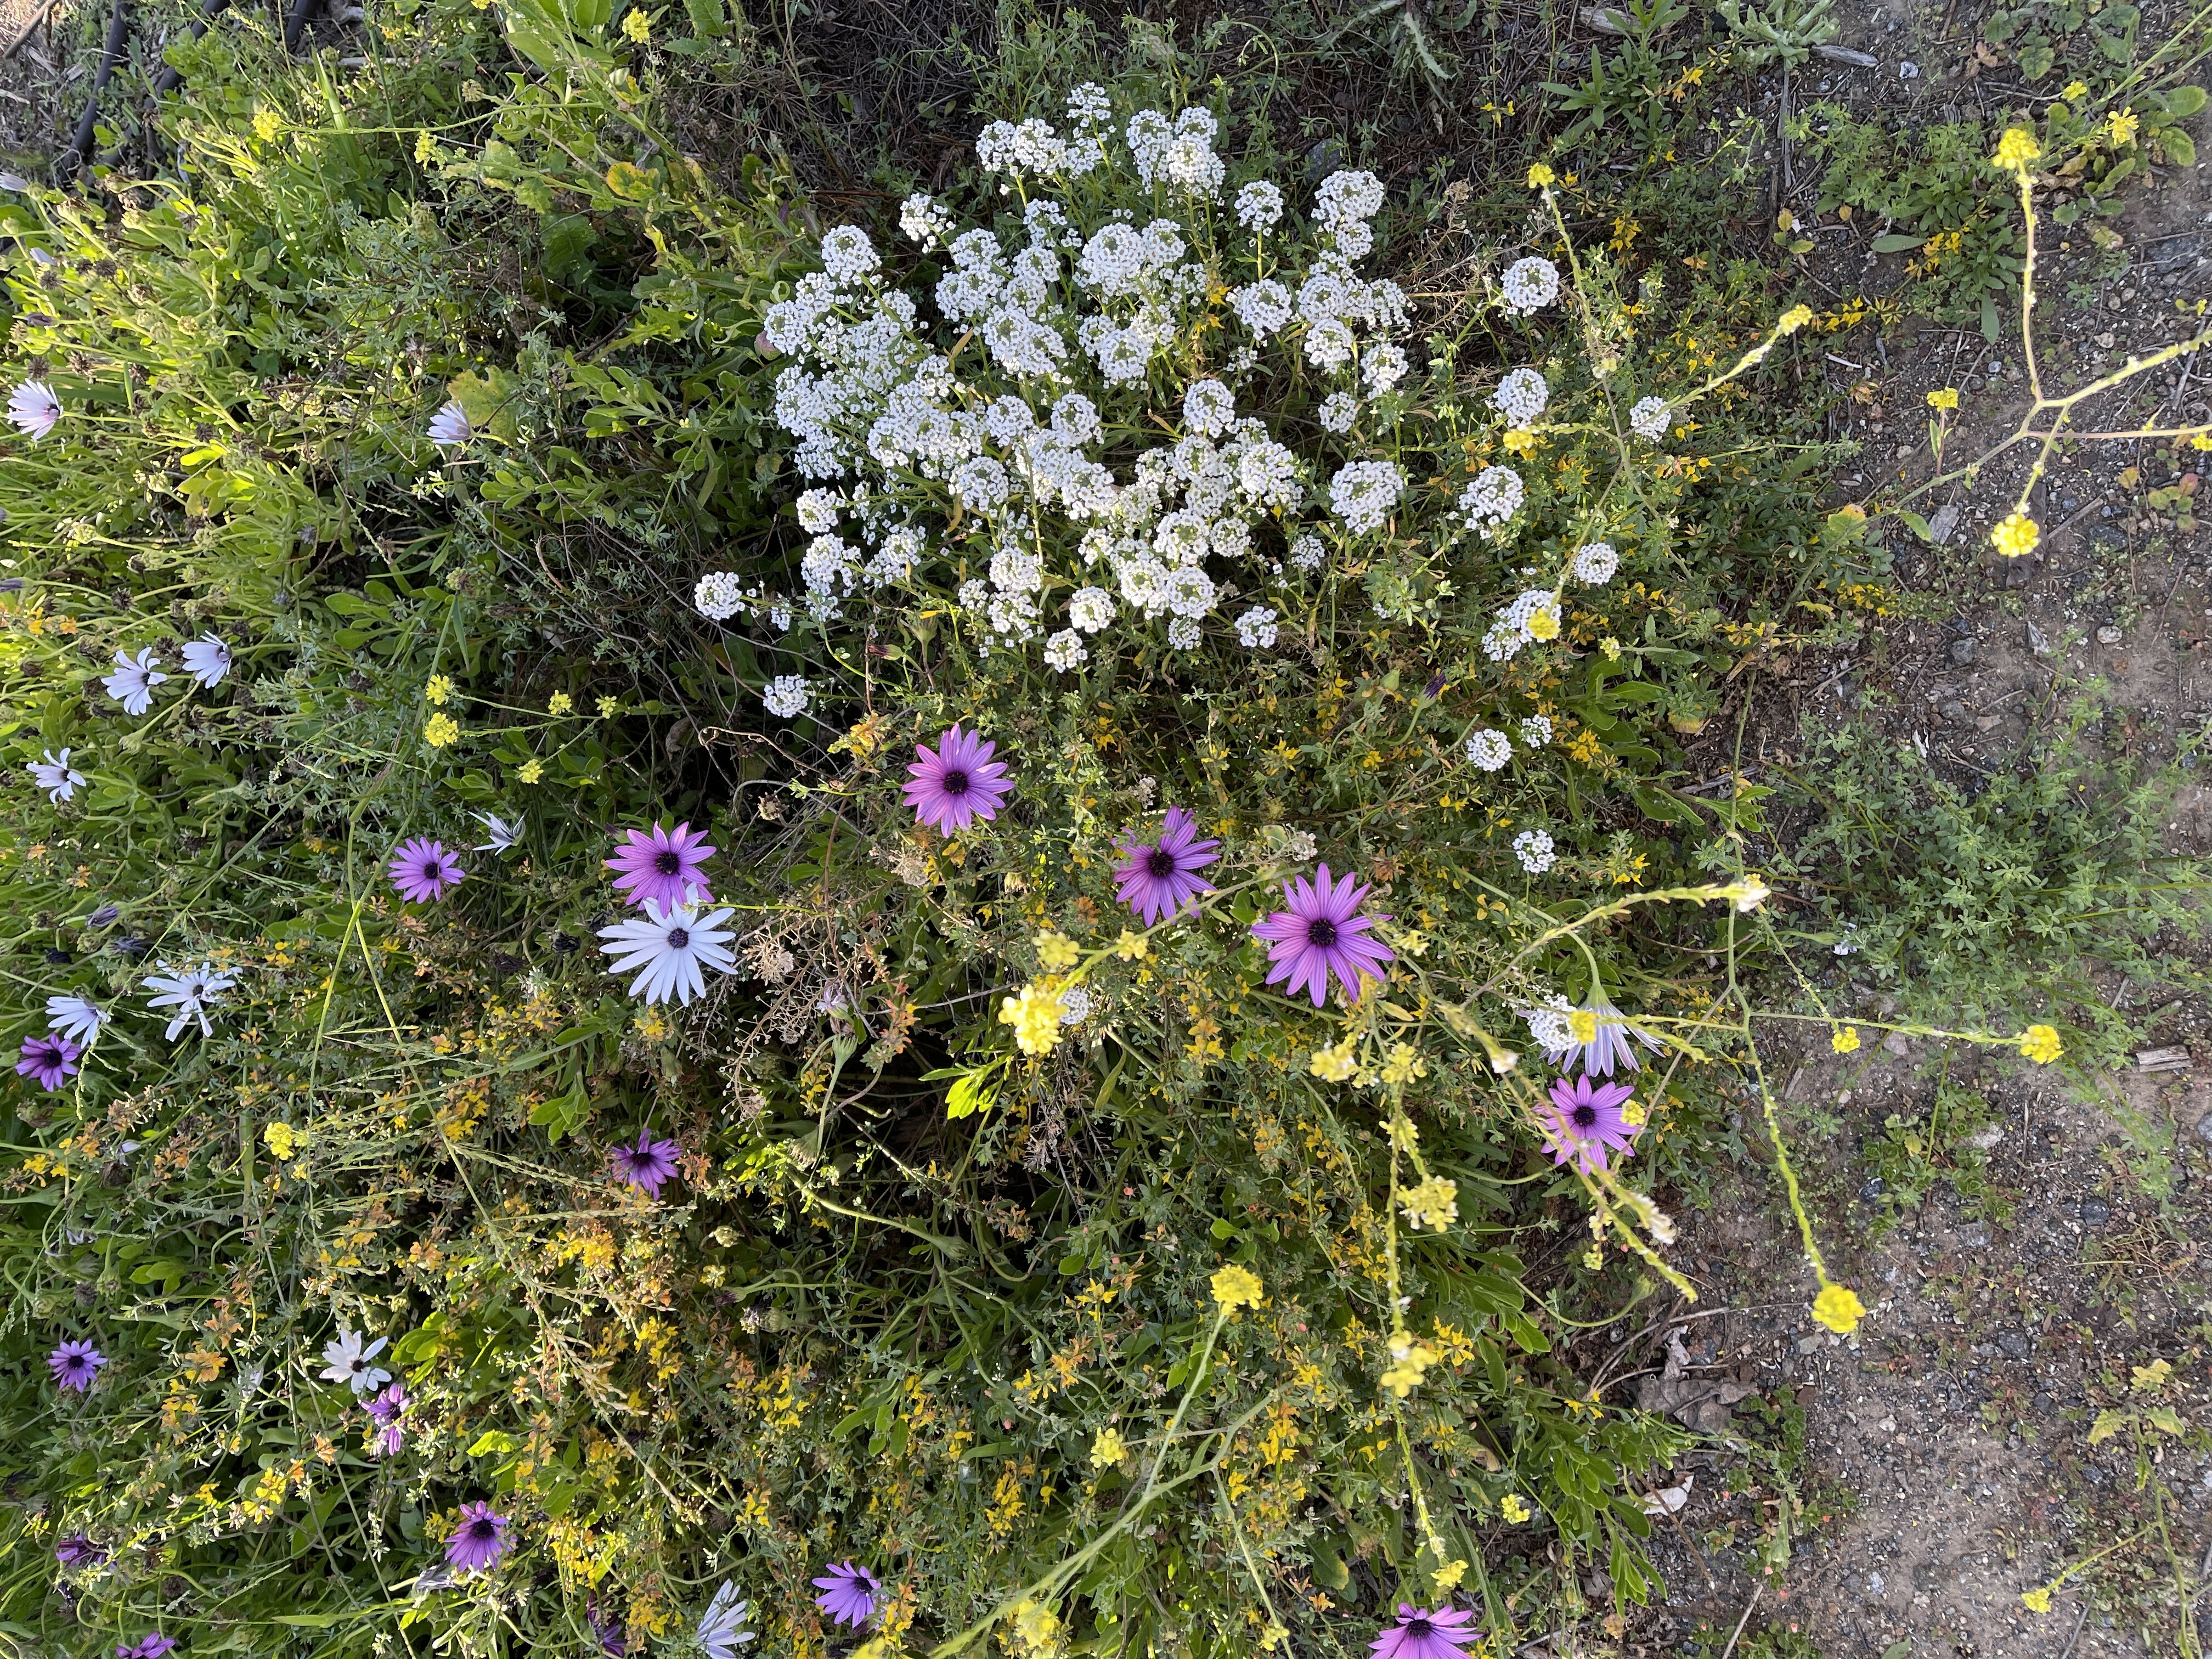 Wild and garden flowers growing together